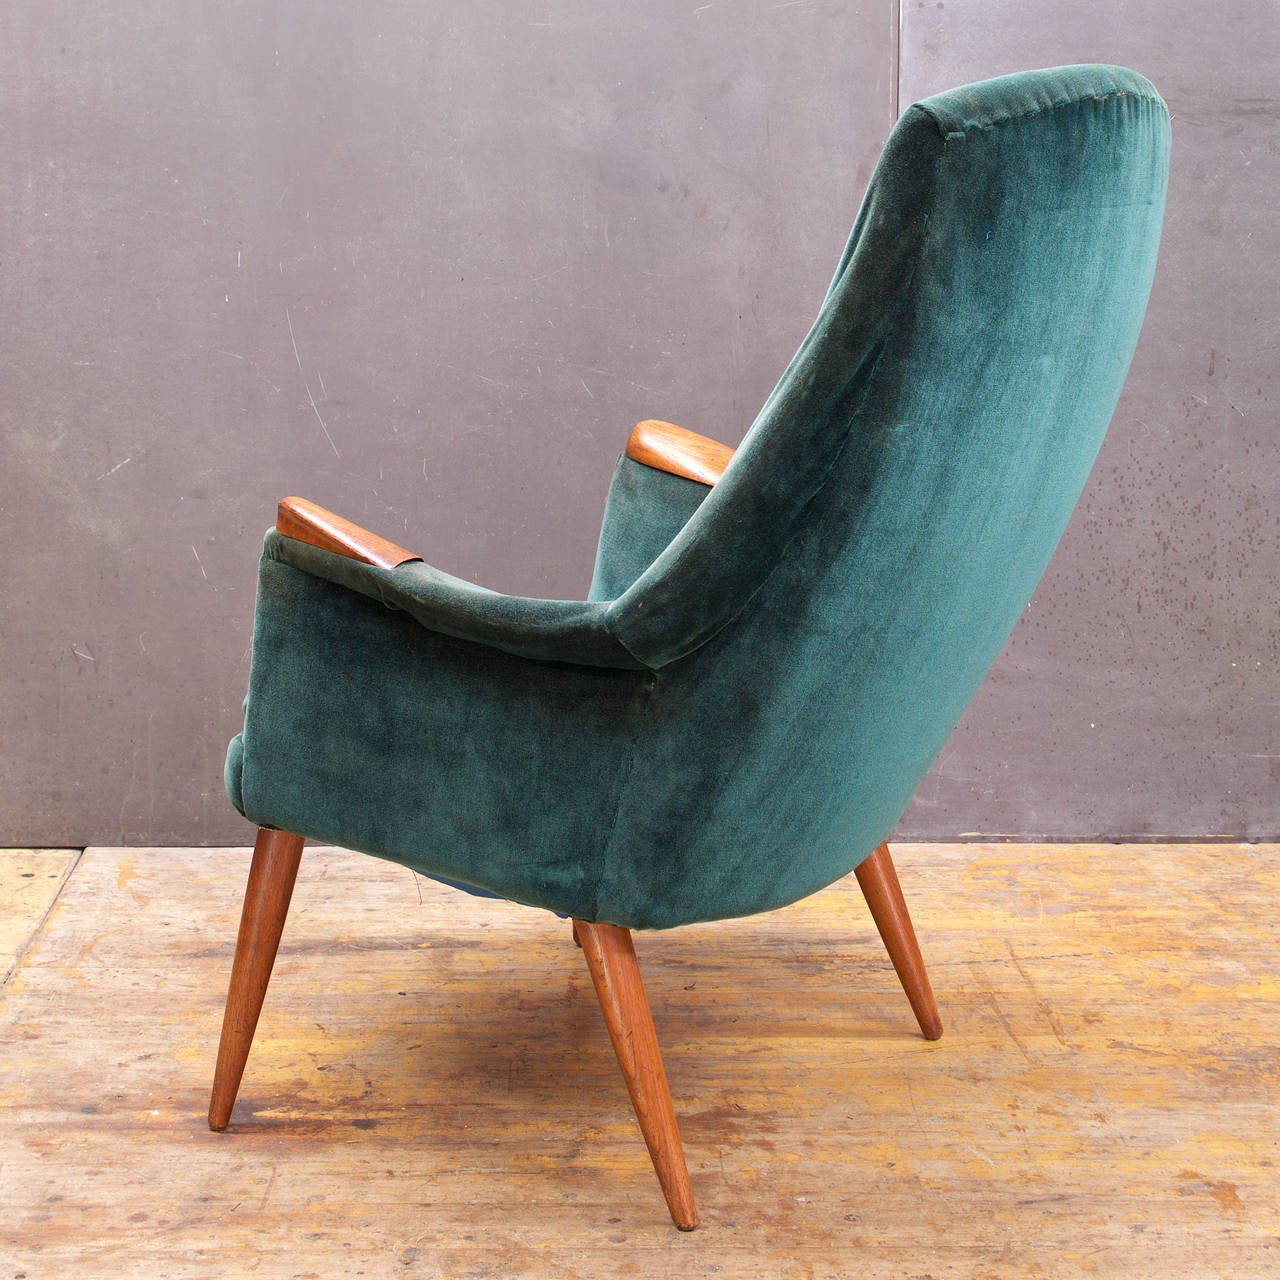 A Rare Teak Upholstered Chair, by uncommon maker. Beautiful Mid-Century Scandinavian Form designed by Gerhard Berg, Made in Sykkylven Norway.  Retains Metal Label. Sturdy Frame, No woodwork necessary, existing upholstery is bad, loose, the foam is